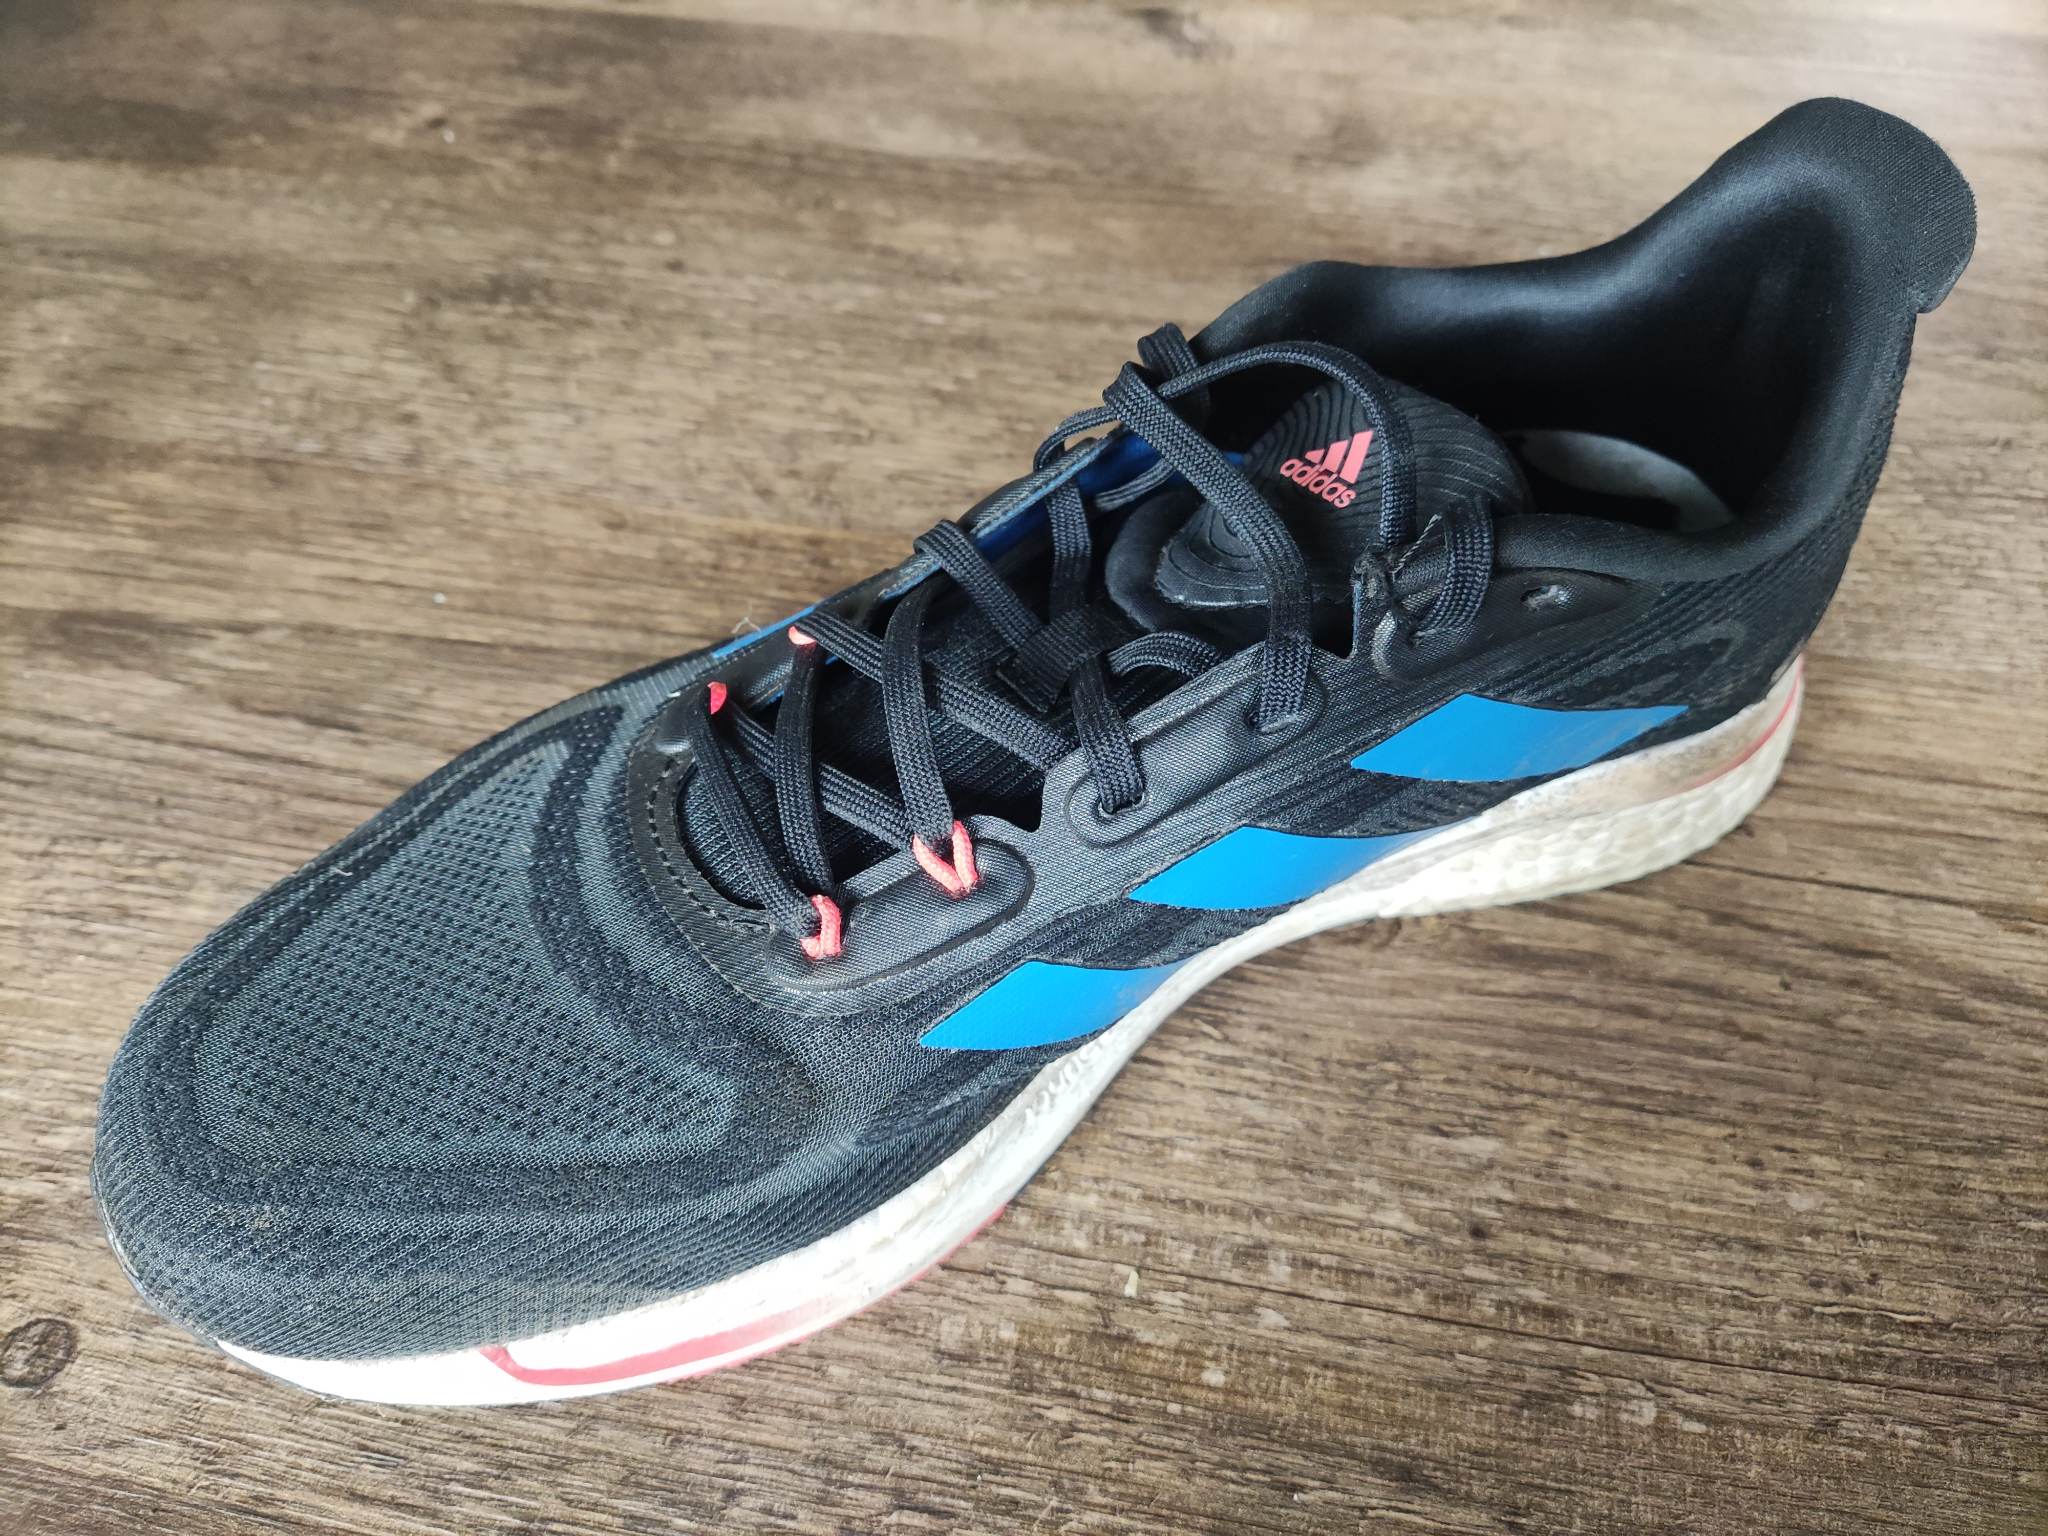 Adidas supernova+ review: features, performance and comfort - Hikeheaven